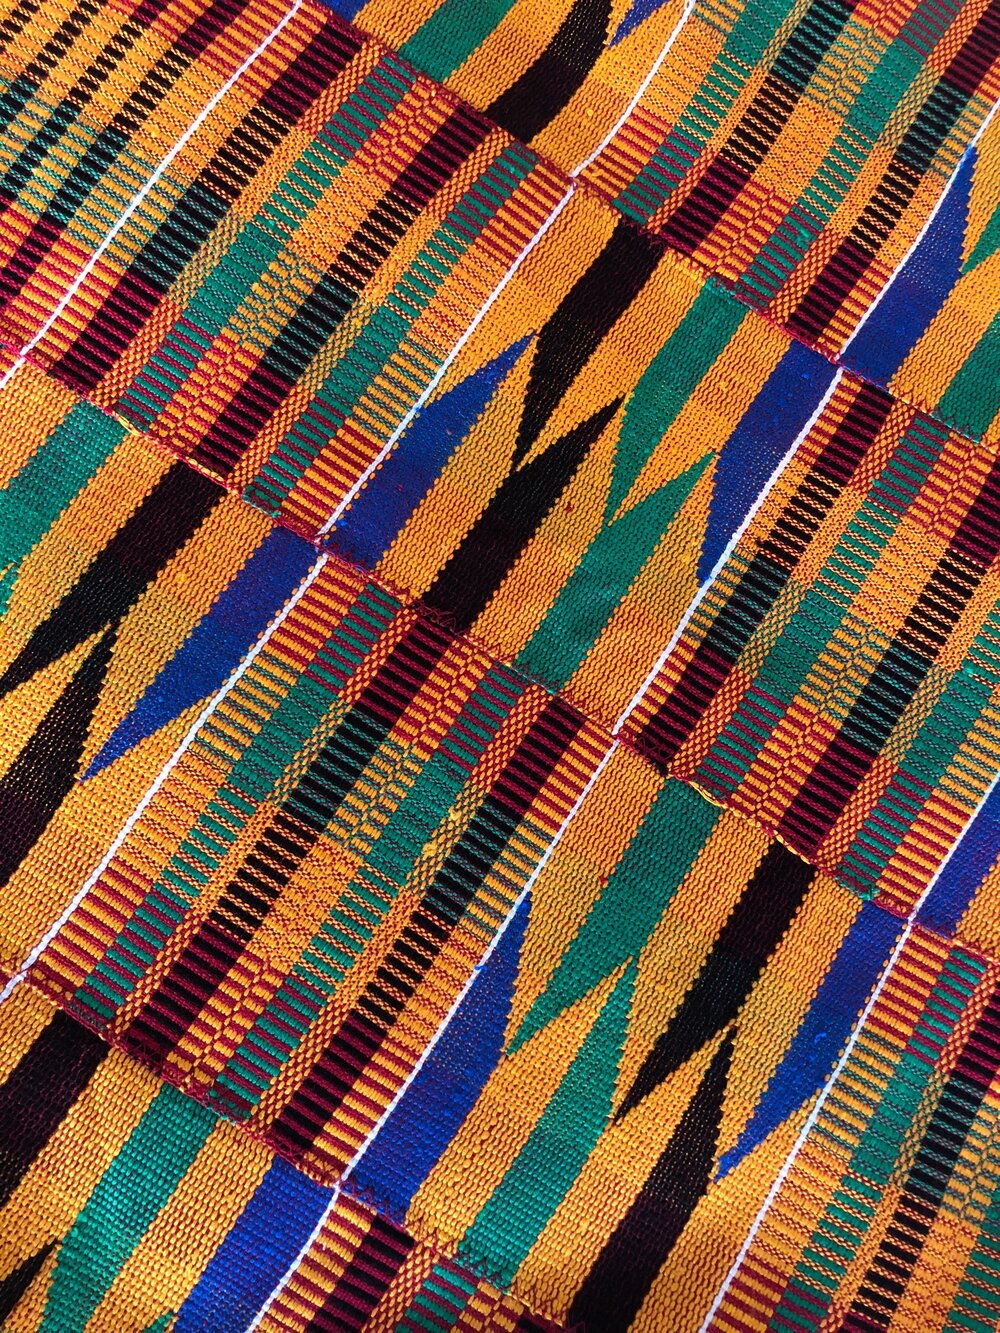 Authentic Kente Cloth — AFROTHREADS® African Print Fabrics